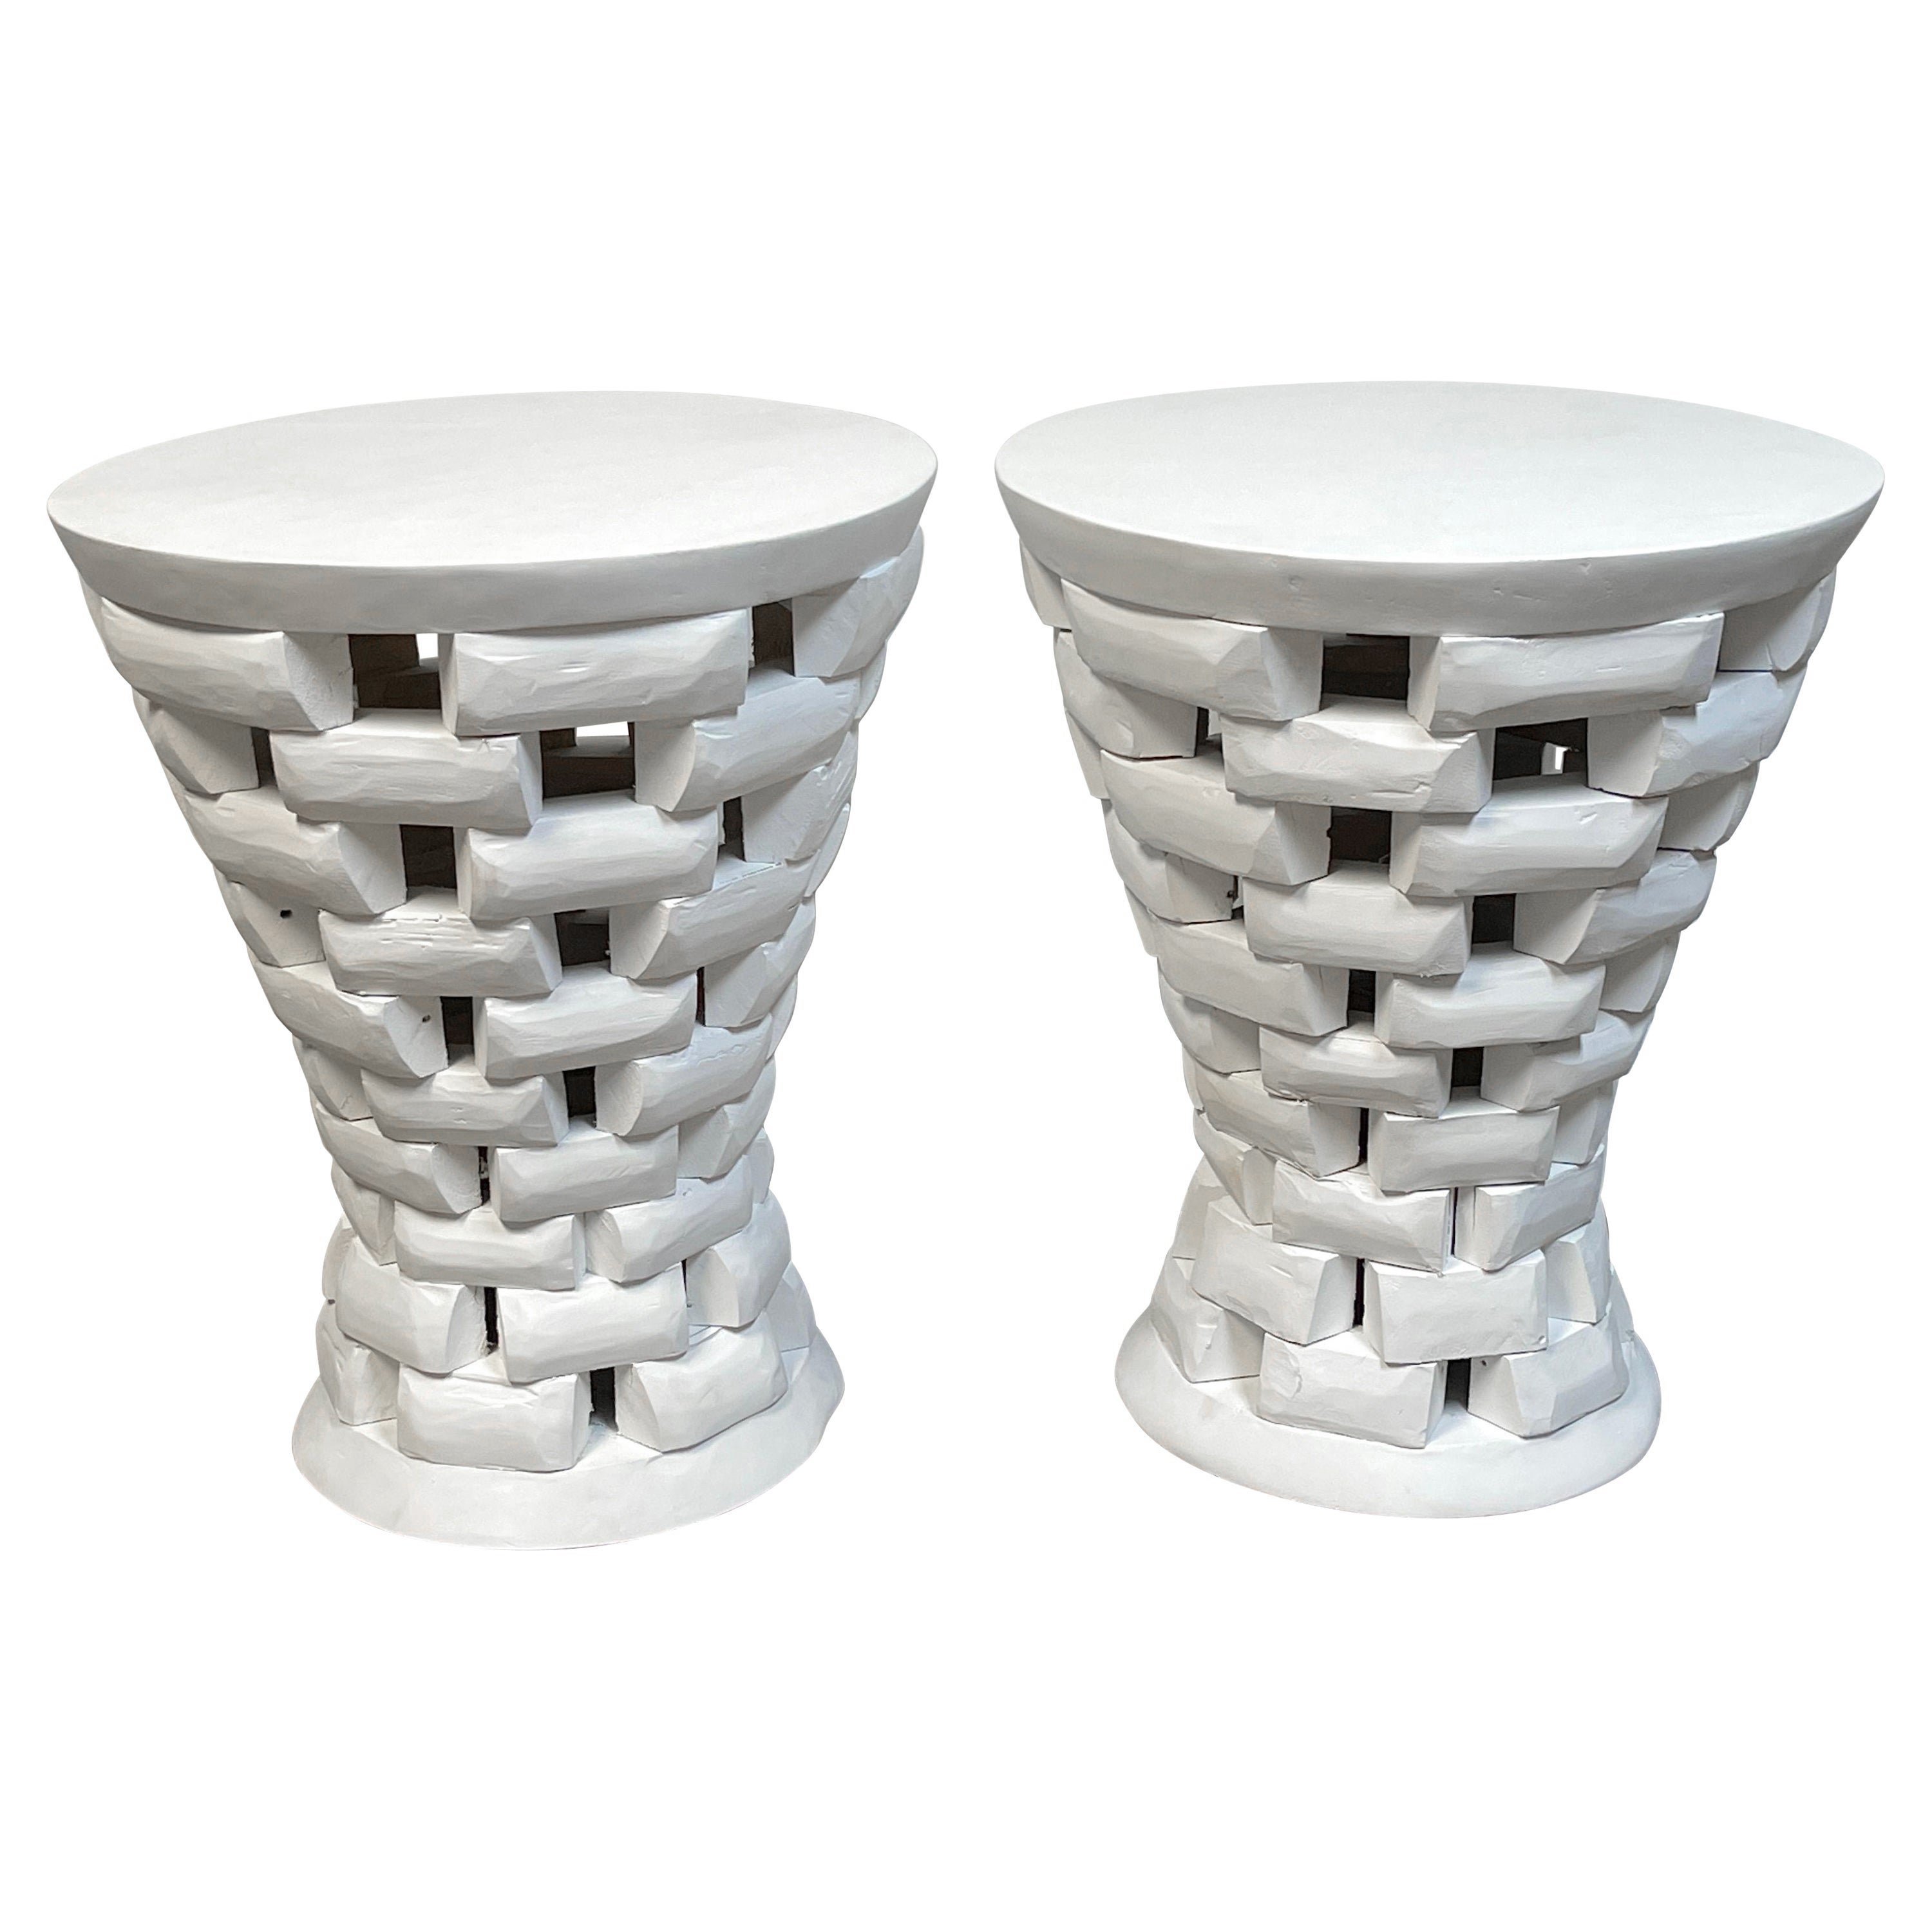 Pair of African Style Carved Teak Pedestal Side Tables, in White